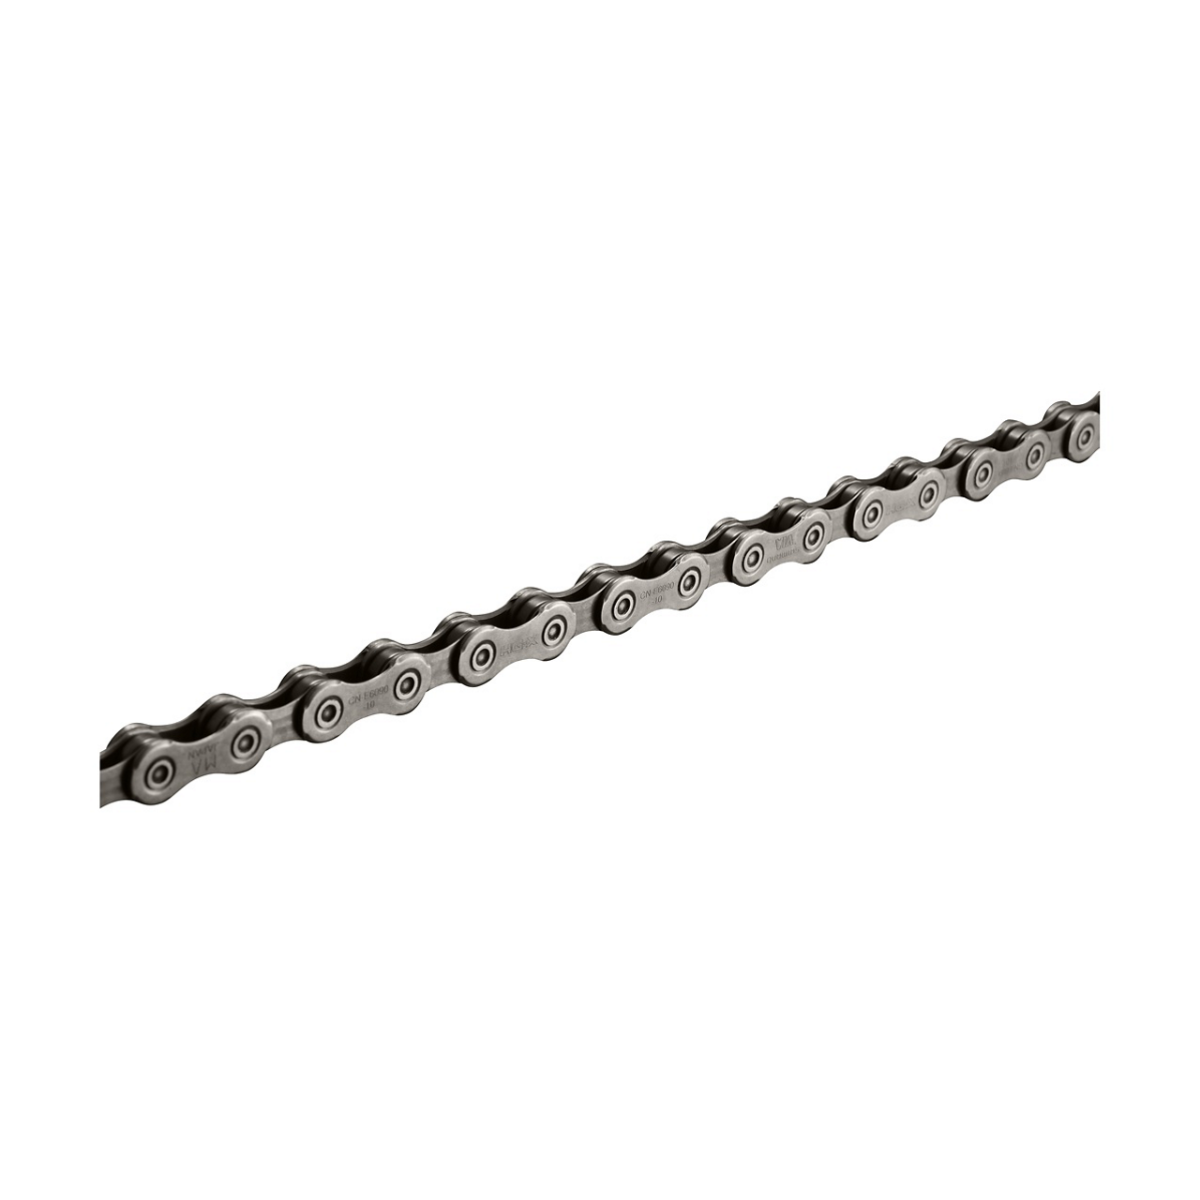 Chain SHIMANO Chain 138 Links w/o End Pin CN-E6090 10-Speed Front Single